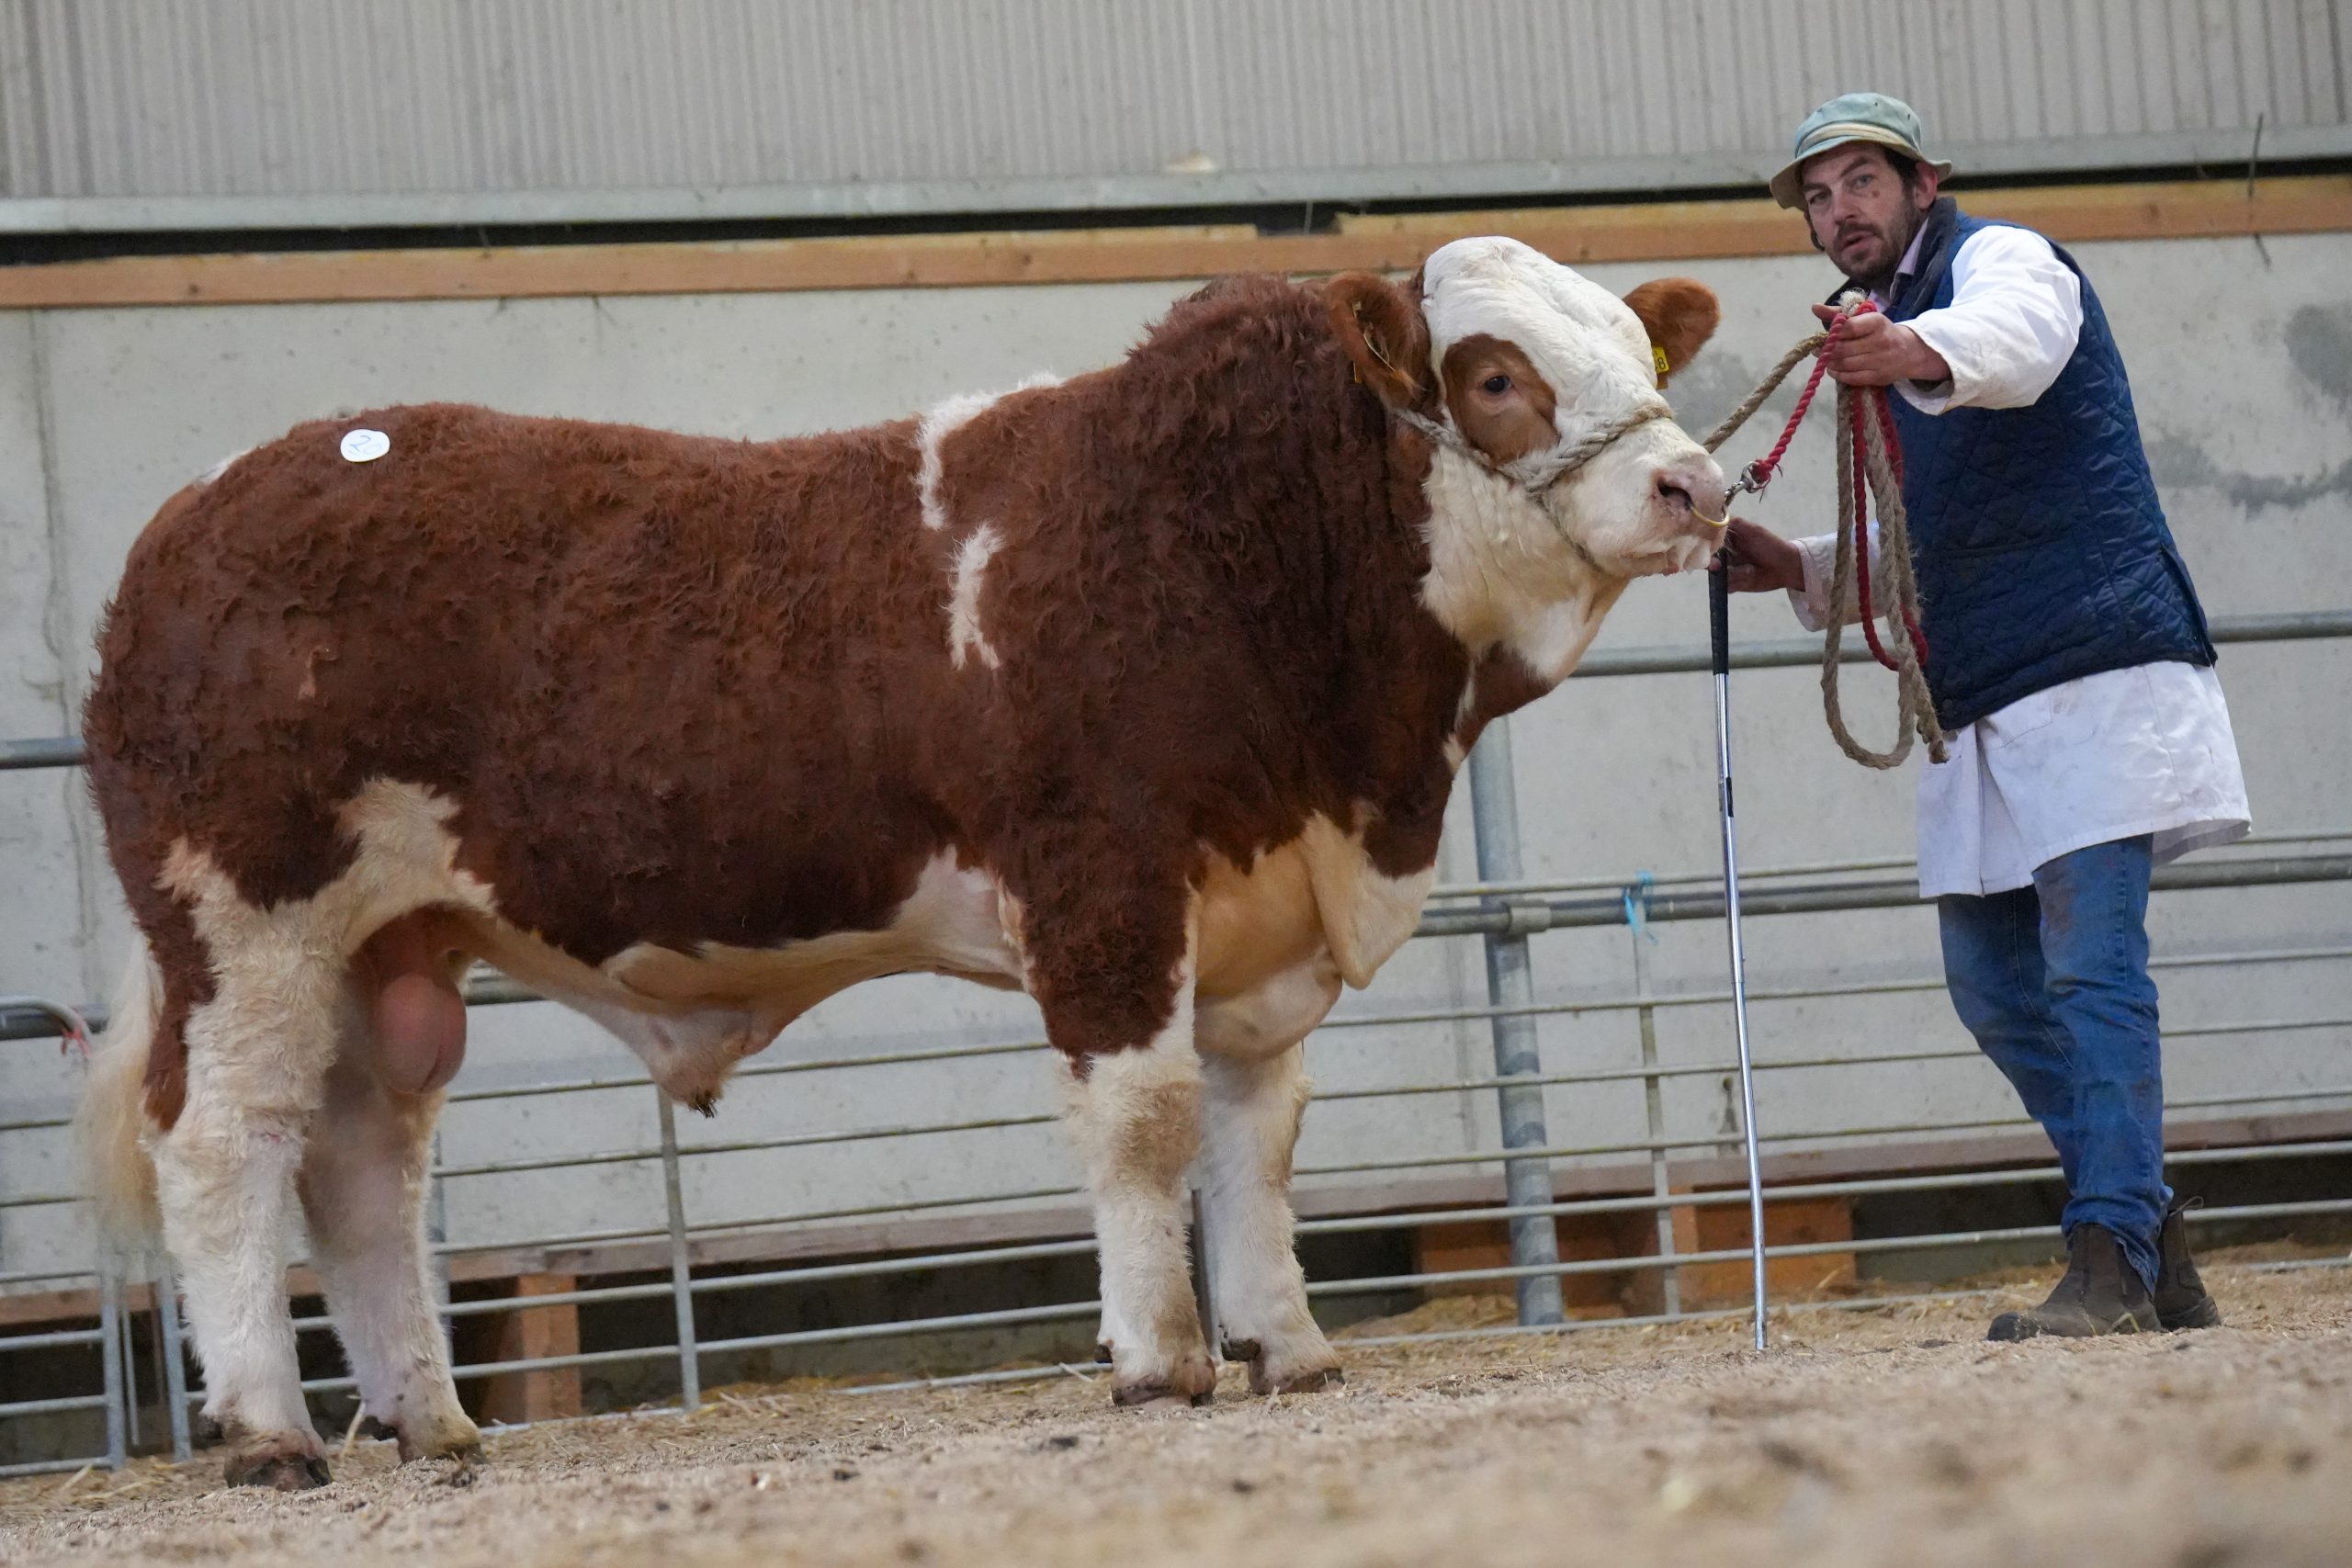 Top Price of €5500 for Clonagh Rocket Explorer at Simmental April Sale last Friday at Tullamore Mart